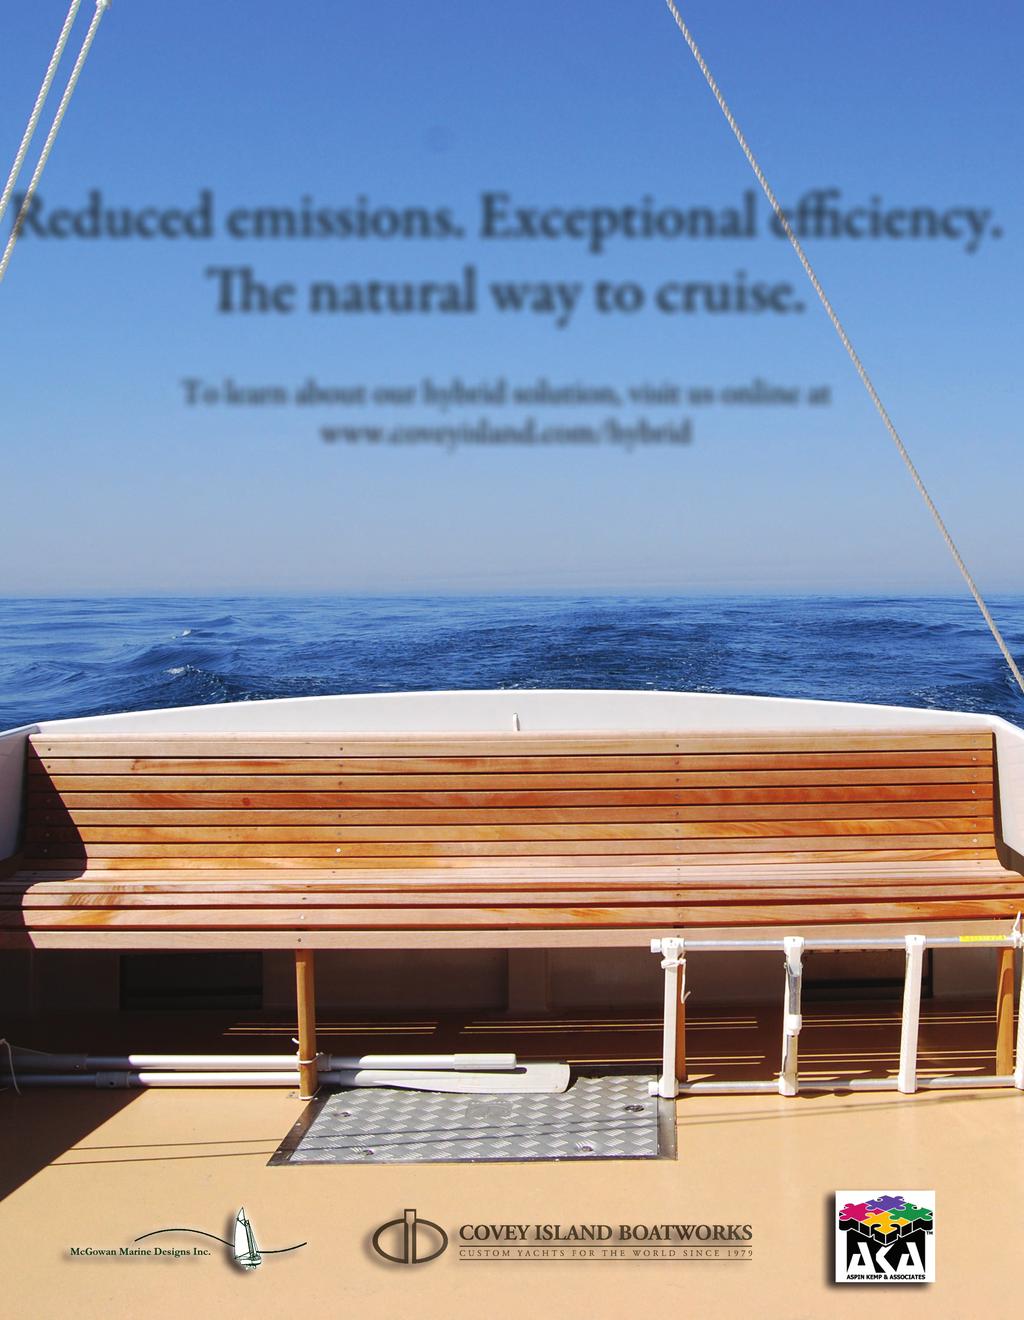 Reduced emissions. Exceptional eﬃciency. e natural way to cruise.